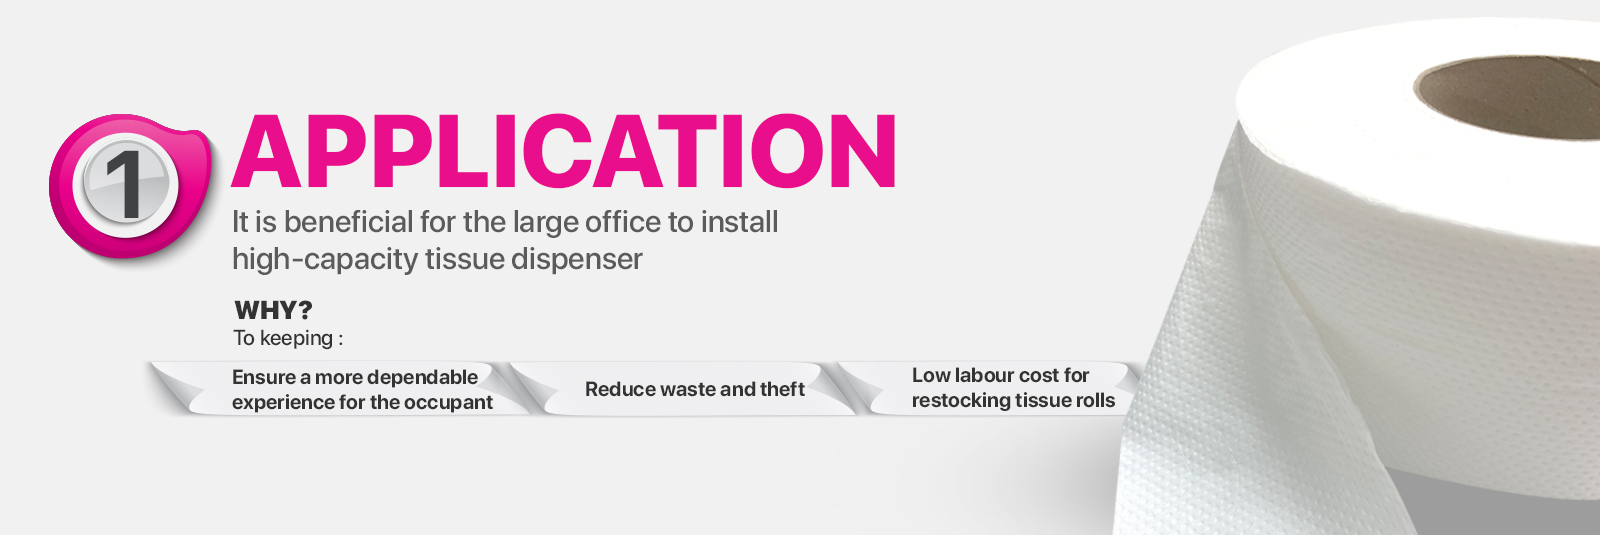 Application - It is beneficial for the large office to install high-capacity tissue dispenser. why to keeping: ensure a more dependable experience for the occupant, reduce waste and theft, low labour cost for restocking tissue rolls.